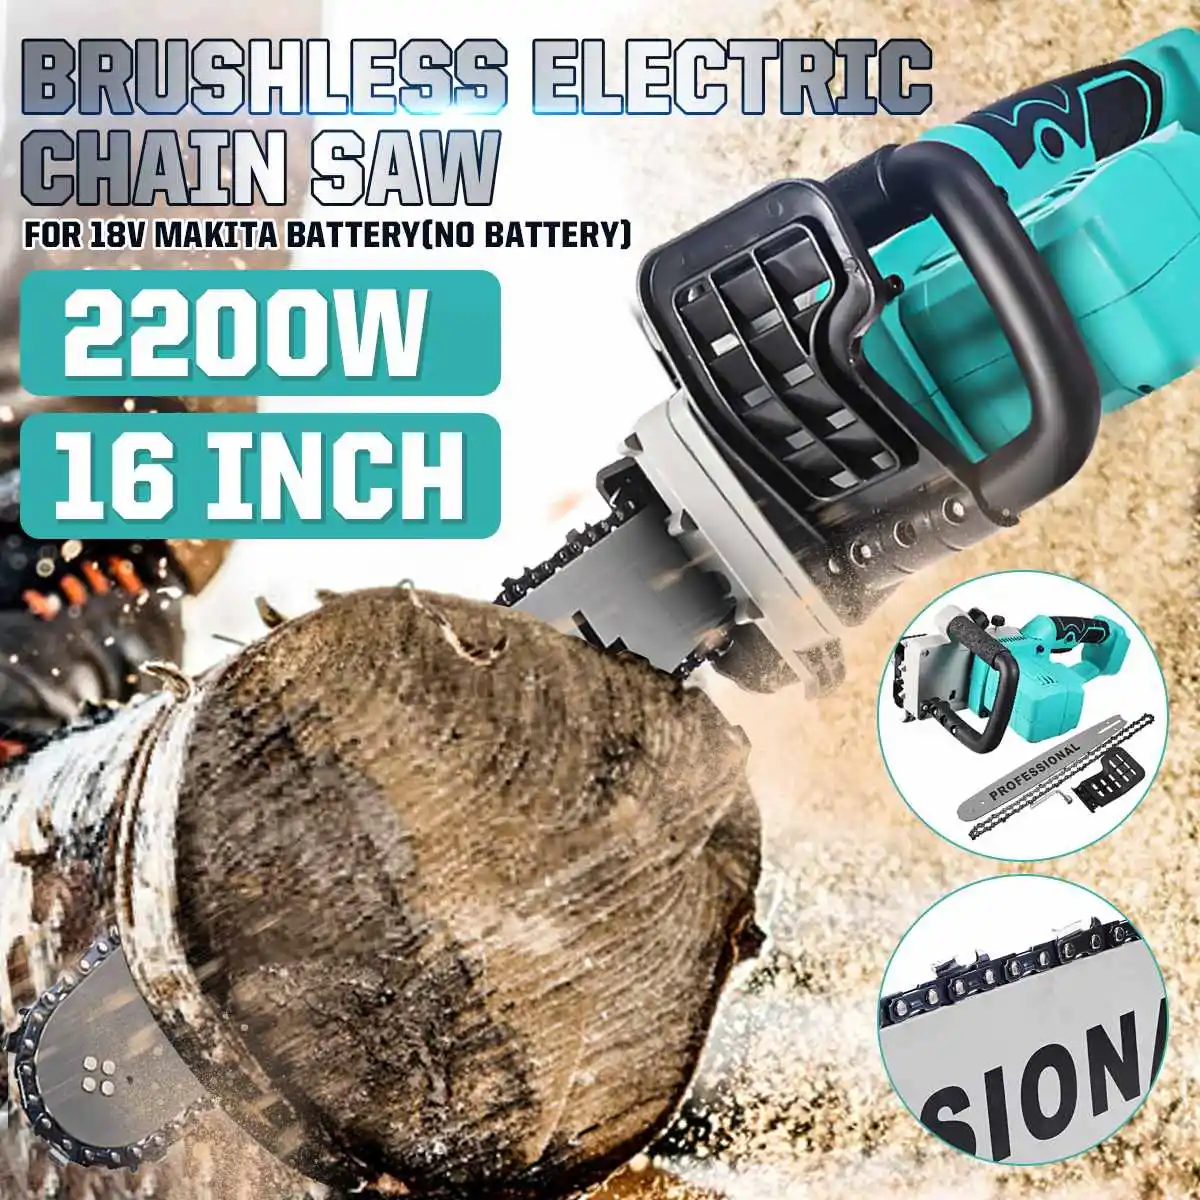 

2200W 16 Inch Mini Electric Saw Chainsaw Garden Tree Logging Saw Woodworking Tools Wood Cutters For 18v/21V Makita Battery